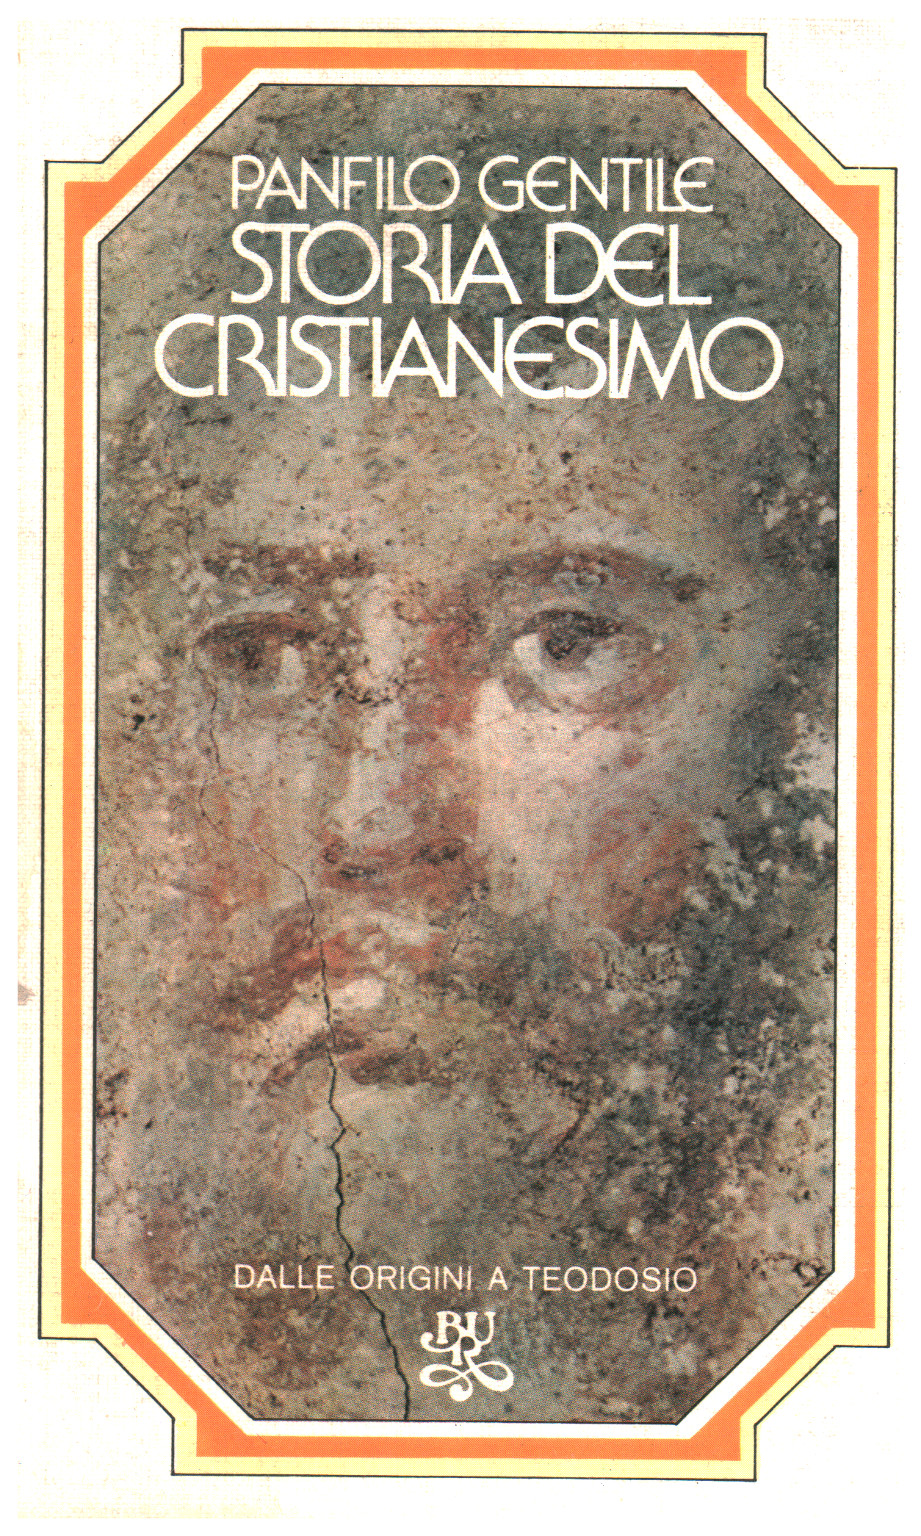 History of Christianity, Panfilo Gentile